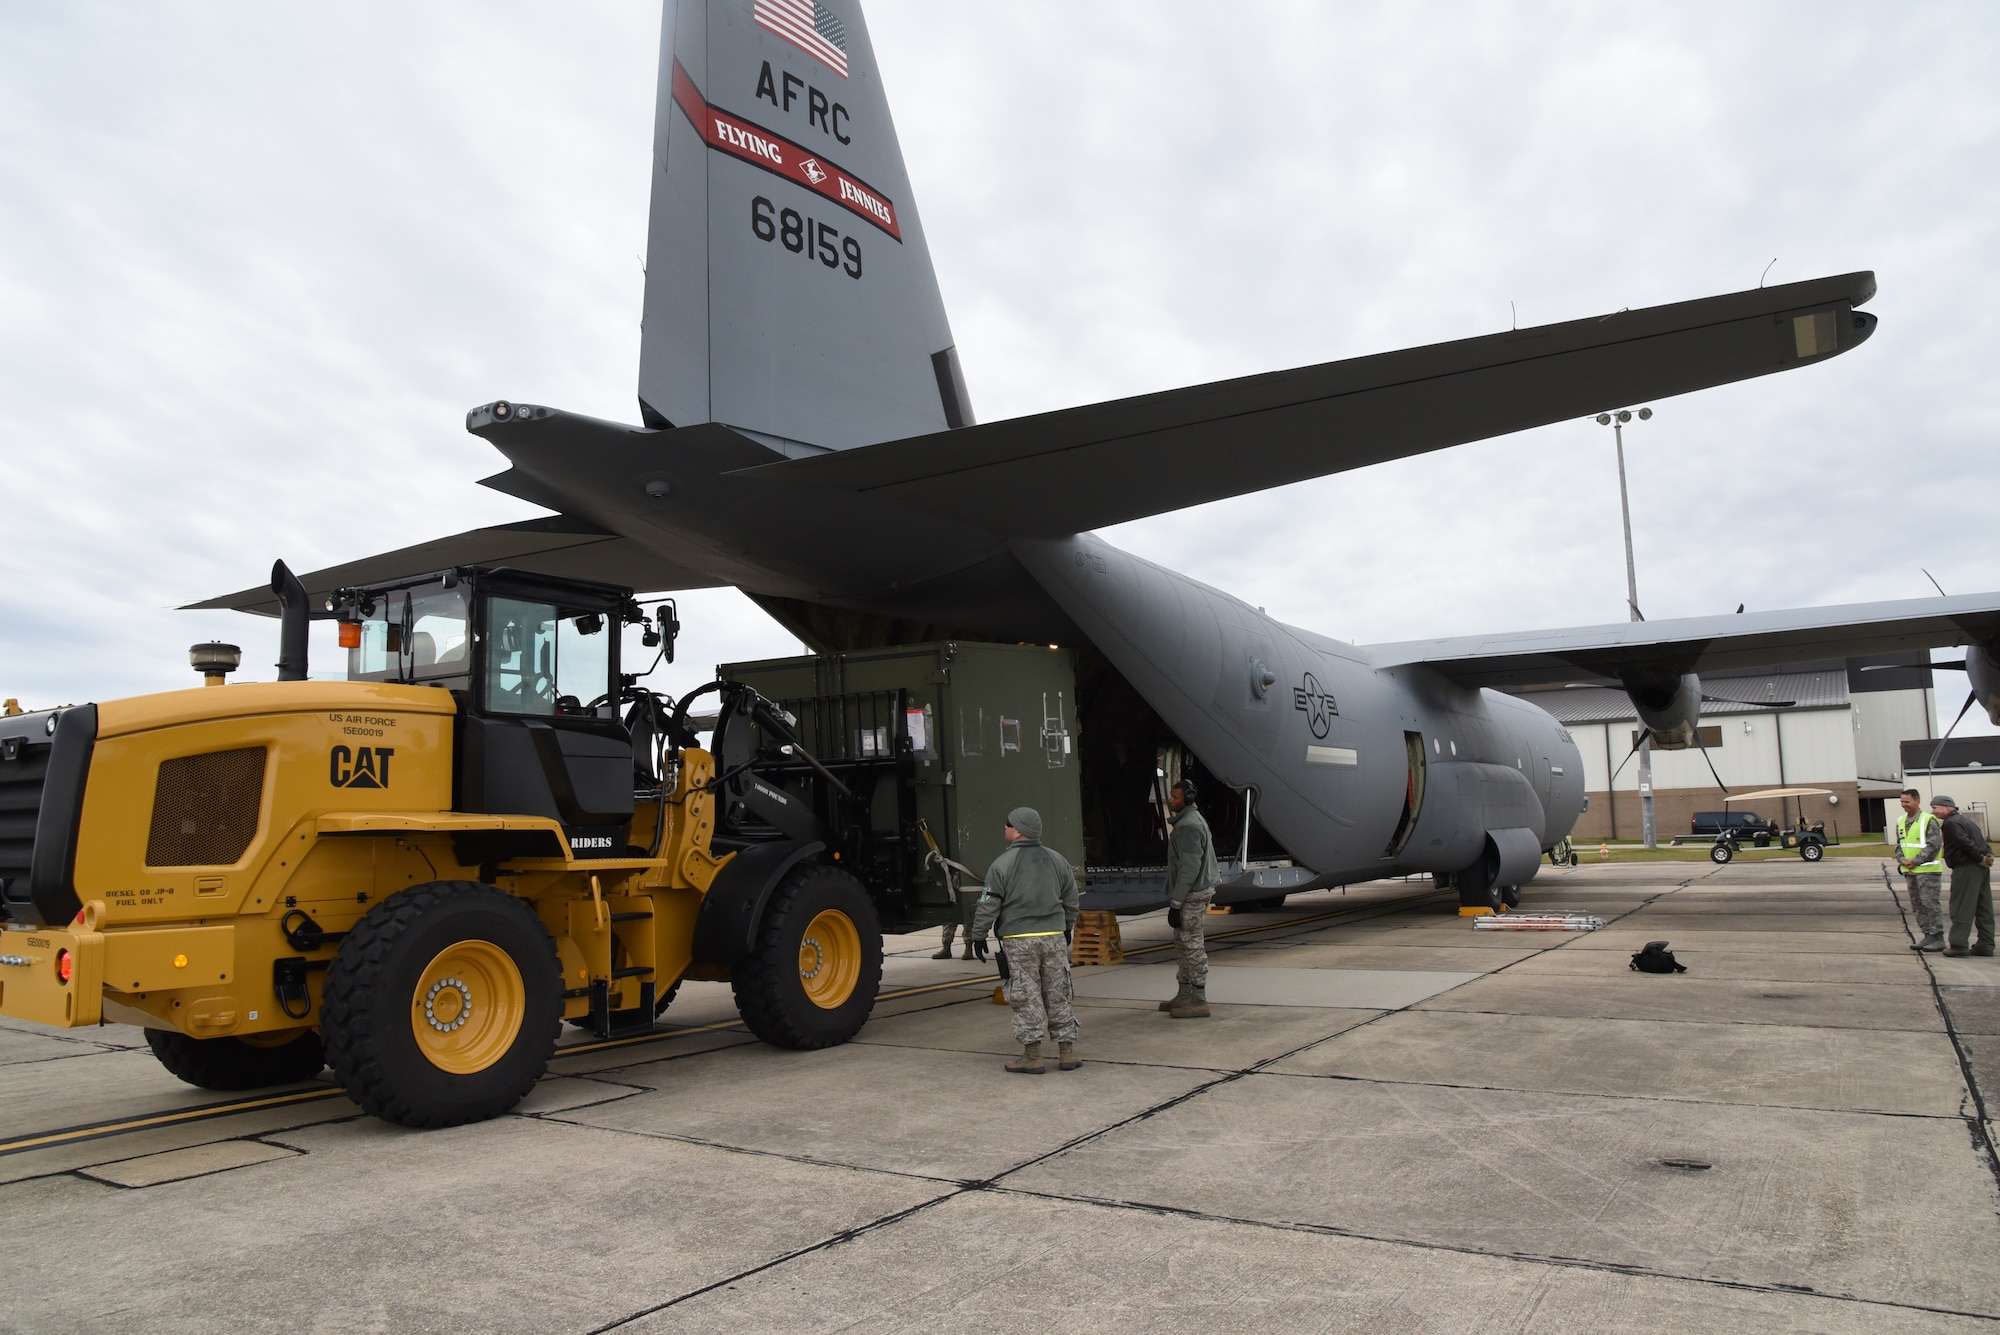 Members of the 403rd Wing load cargo onto an aircraft during Exercise Agile Sabre at Keesler Air Force Base, Mississippi, Jan. 14, 2016. (U.S. Air Force photo/Staff Sgt. Nicholas Monteleone)